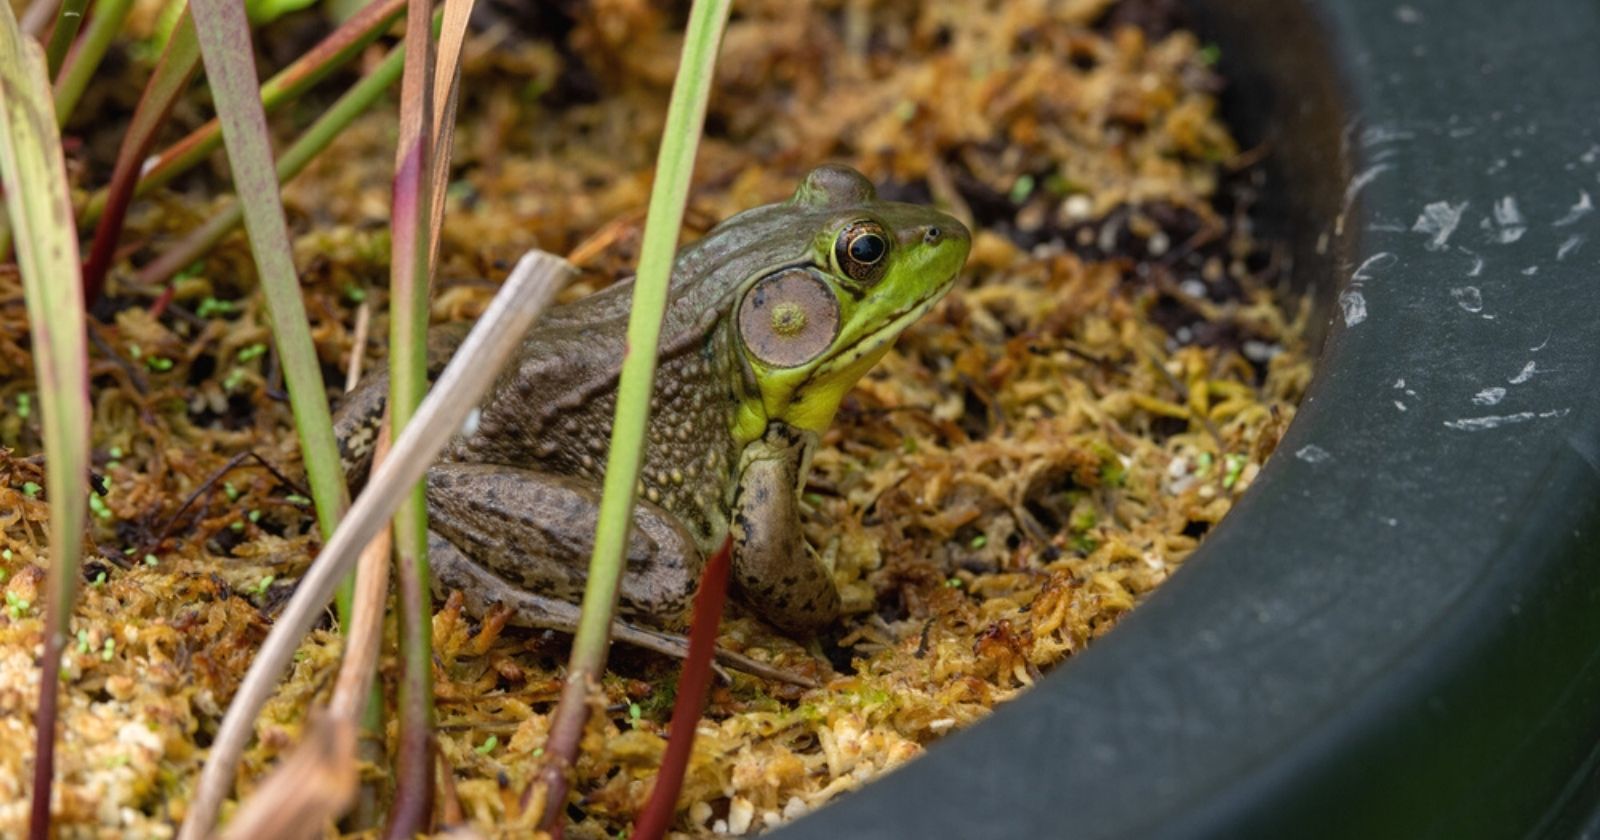 To help frogs and other amphibians, here's how to set up a shelter in your yard